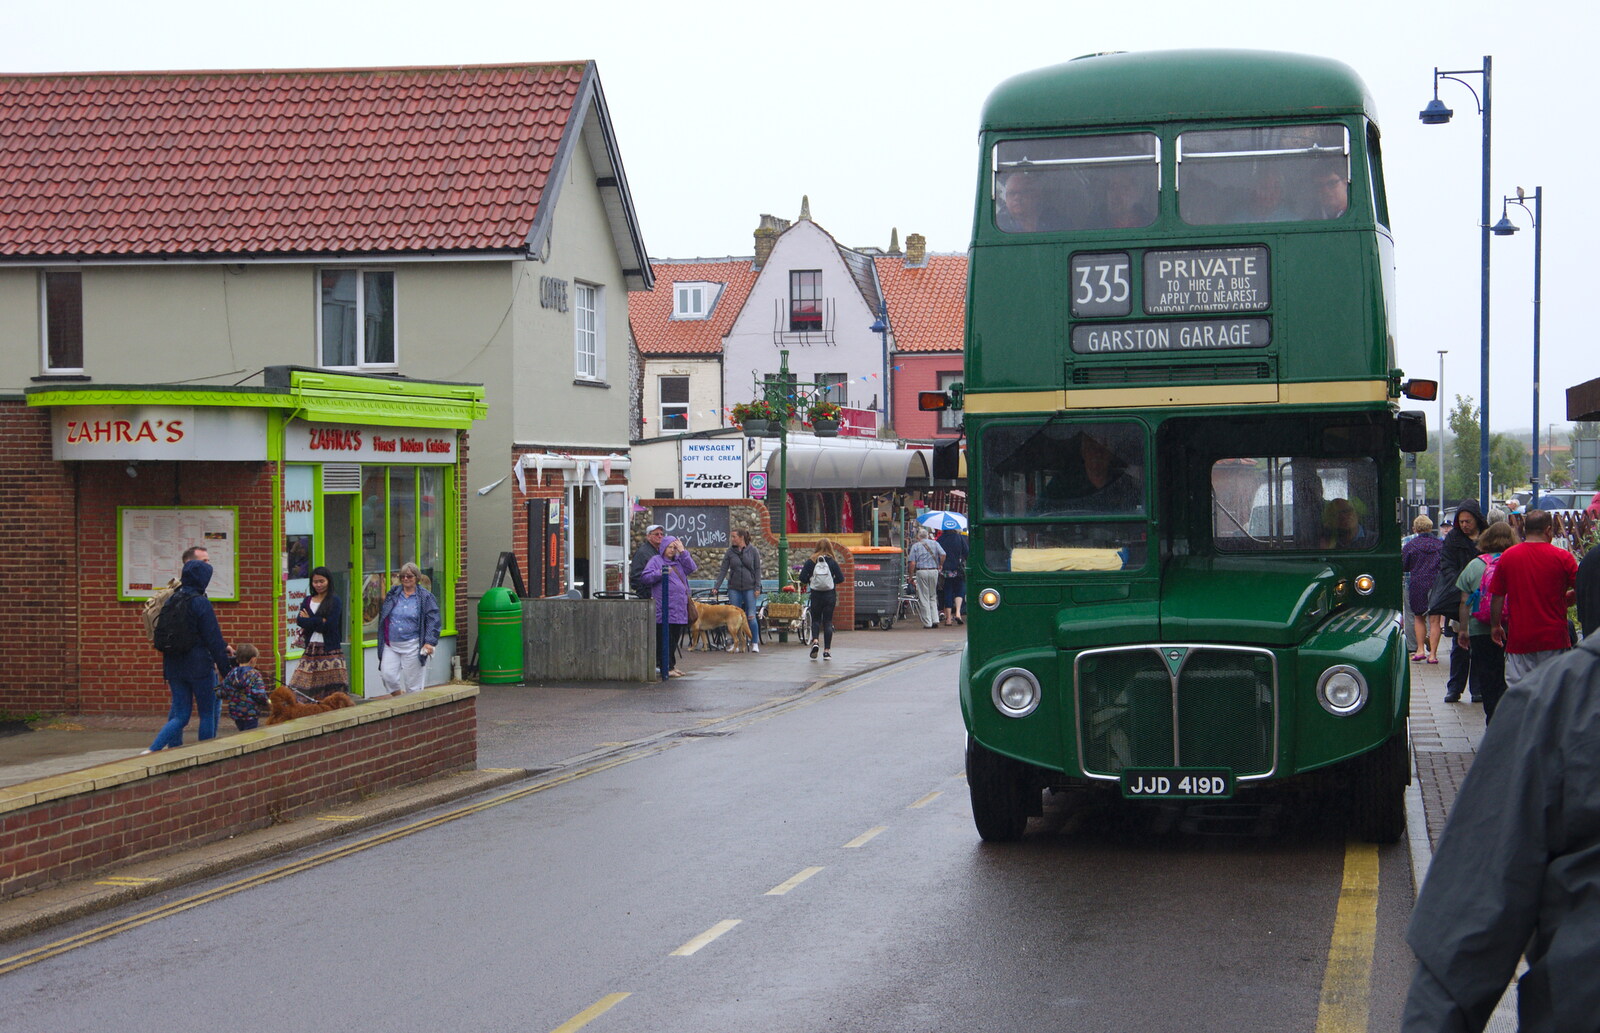 There's a vintage bus outside the station from Kelling Camping and the Potty Morris Festival, Sheringham, North Norfolk - 6th July 2019